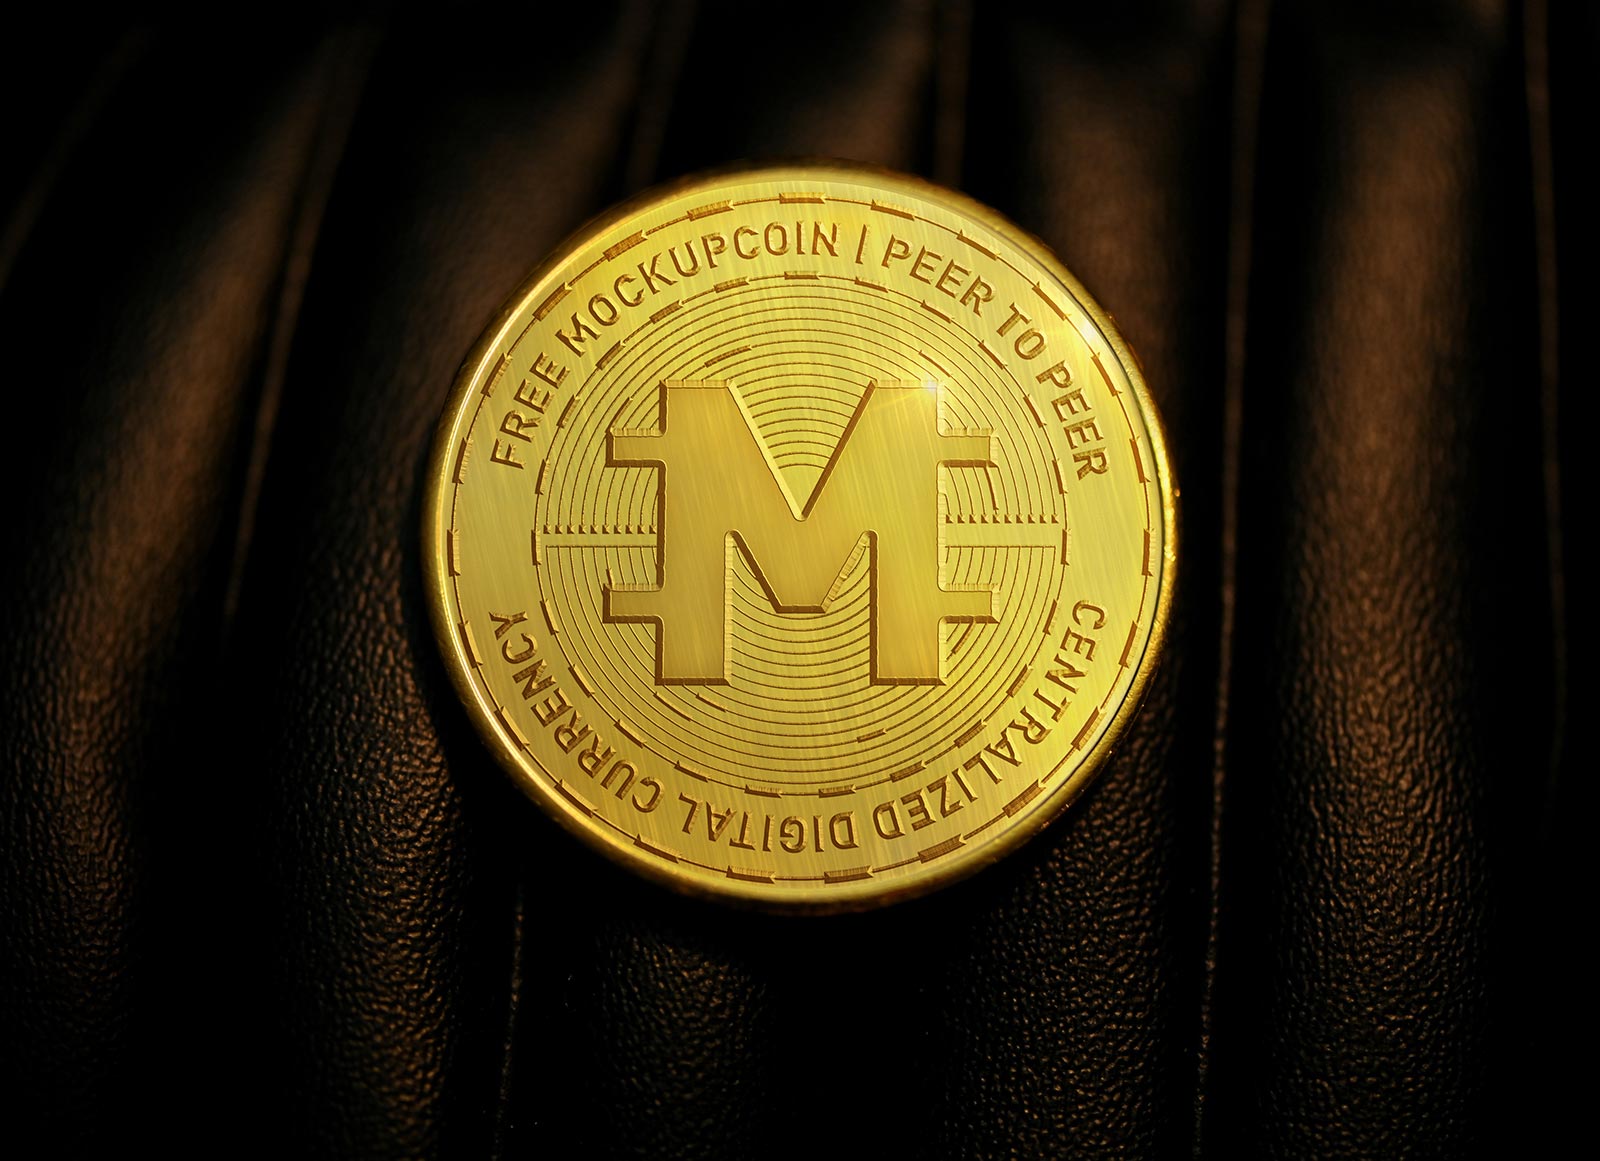 Free-Crypto-currency-Coin-Mockup-PSD